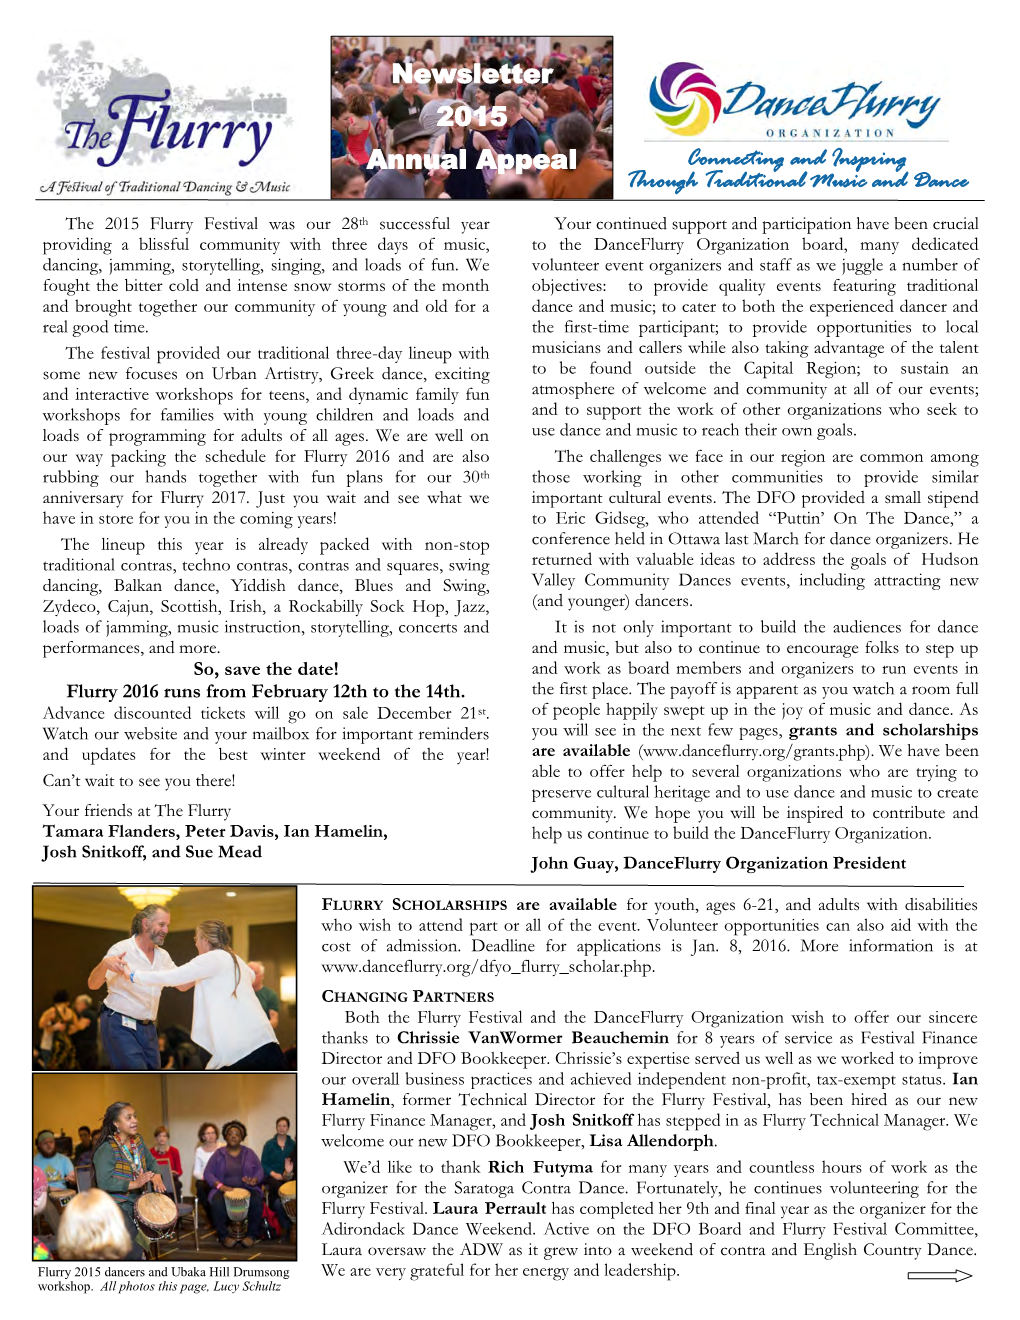 Newsletter 2015 Annual Appeal